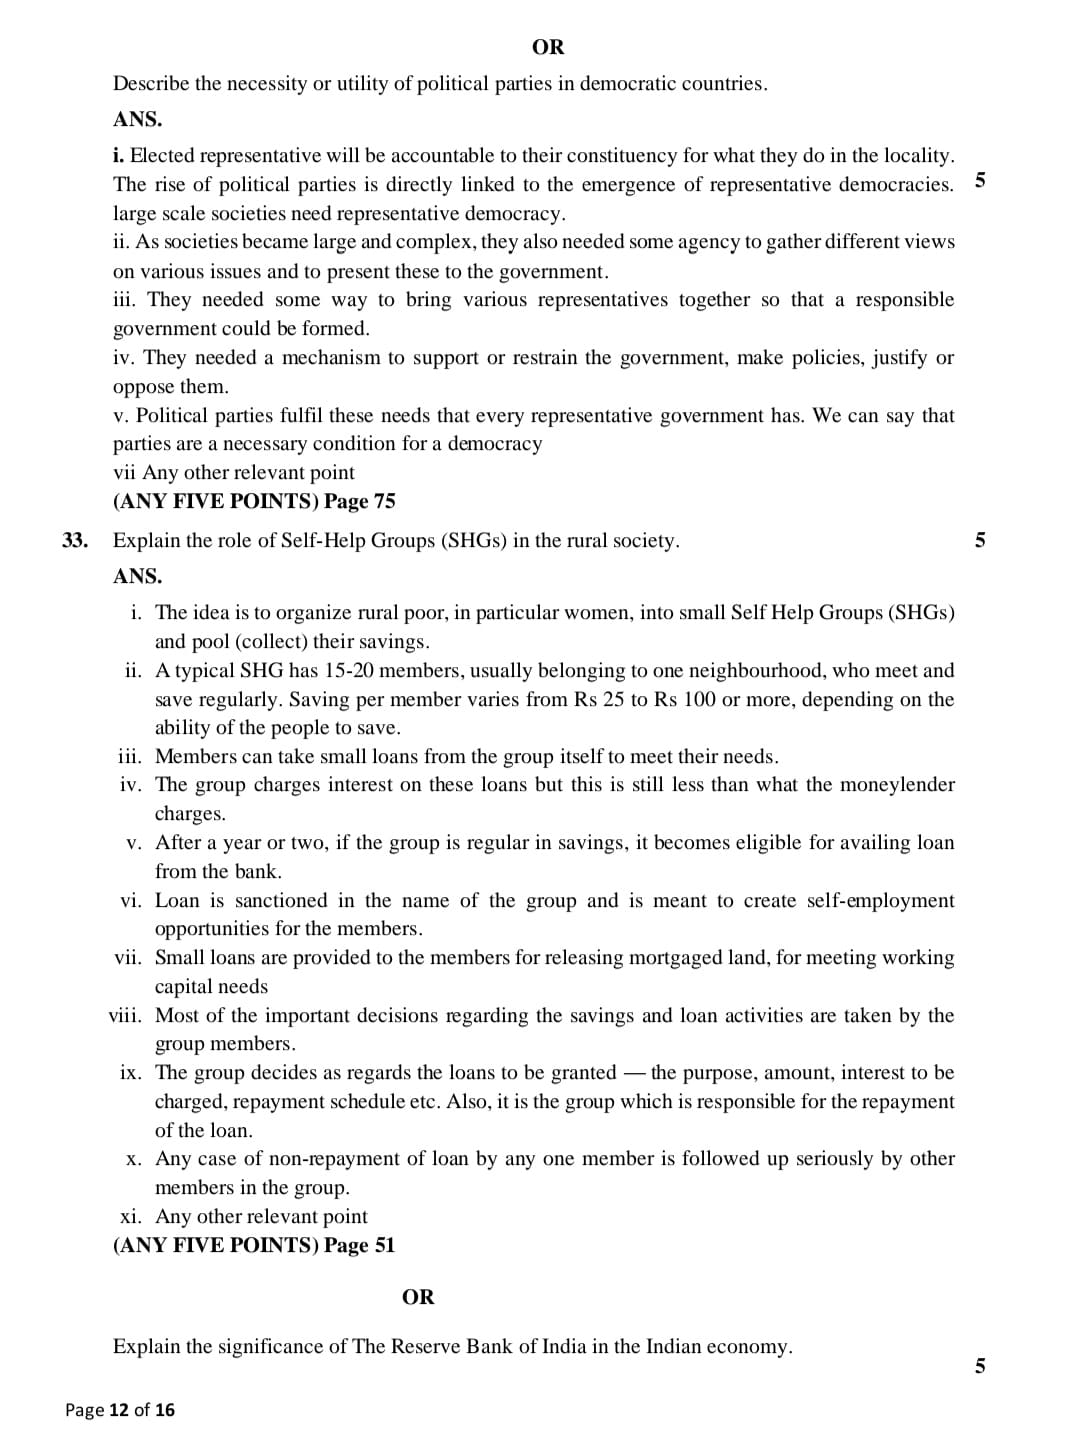 cbse class 10 social science official sample question paper12